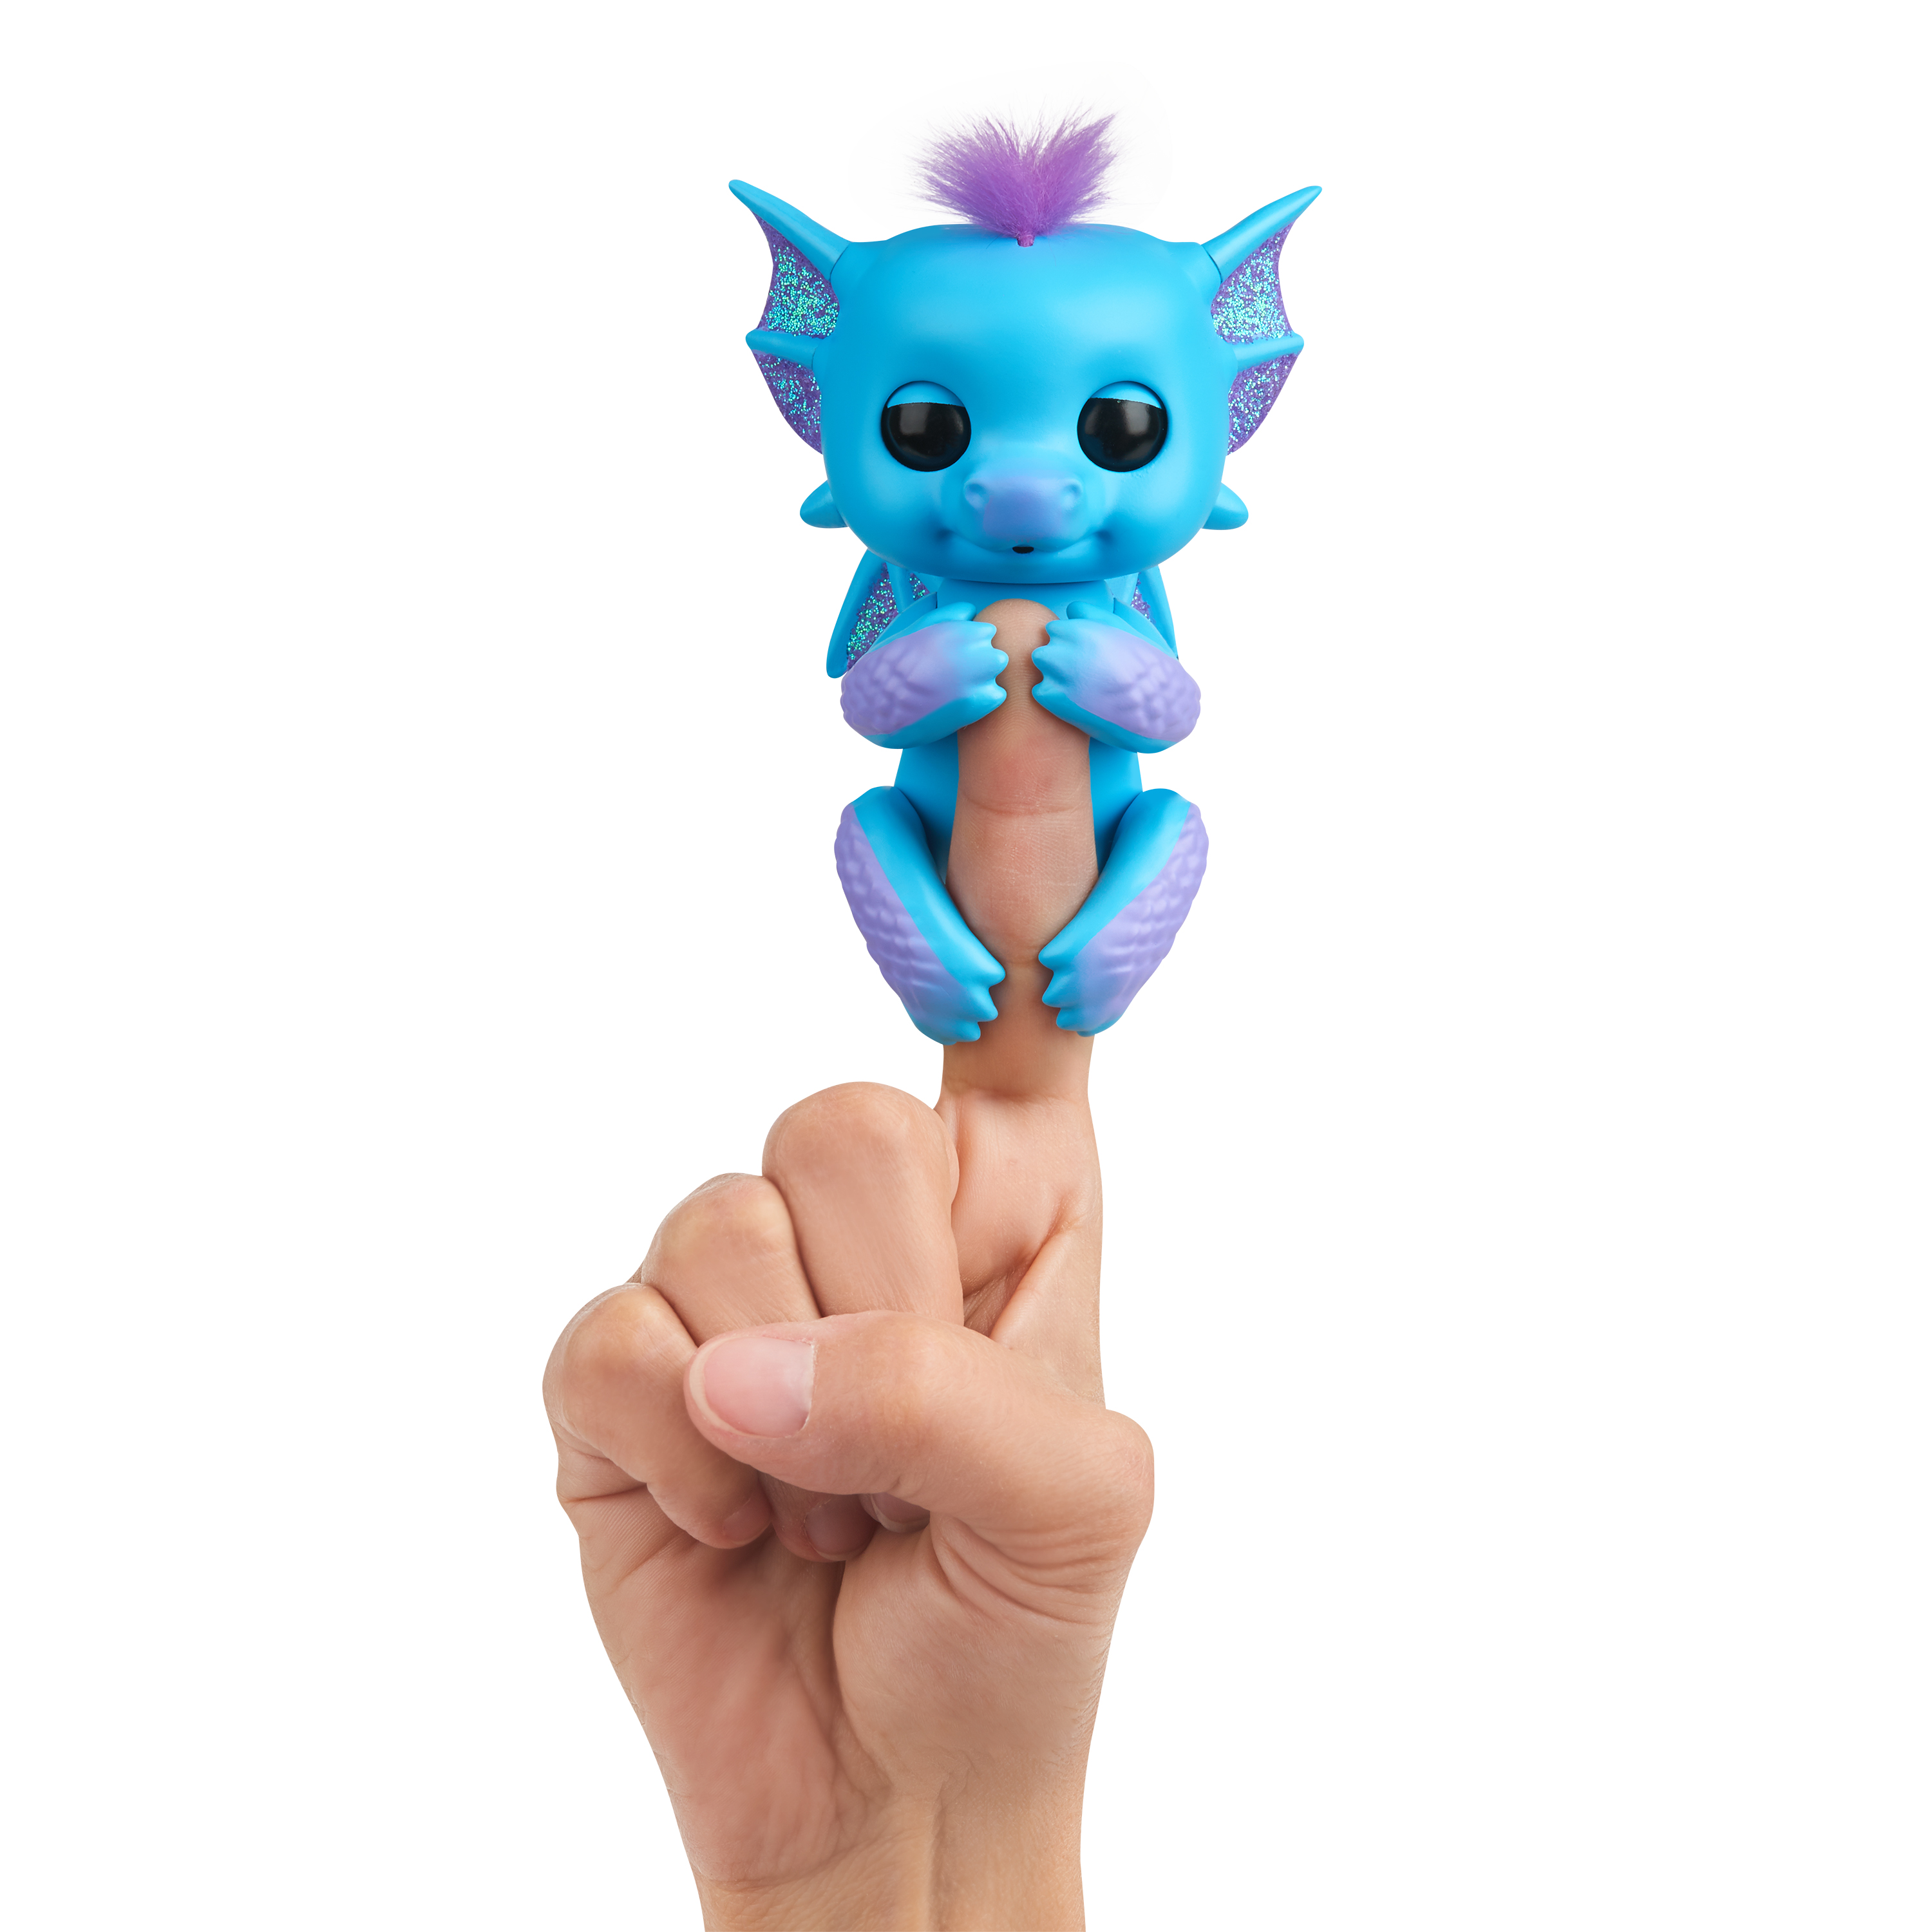 Fingerlings - Glitter Dragon - Tara (Blue with Purple) - Interactive Baby Collectible Pet - By WowWee - image 2 of 9